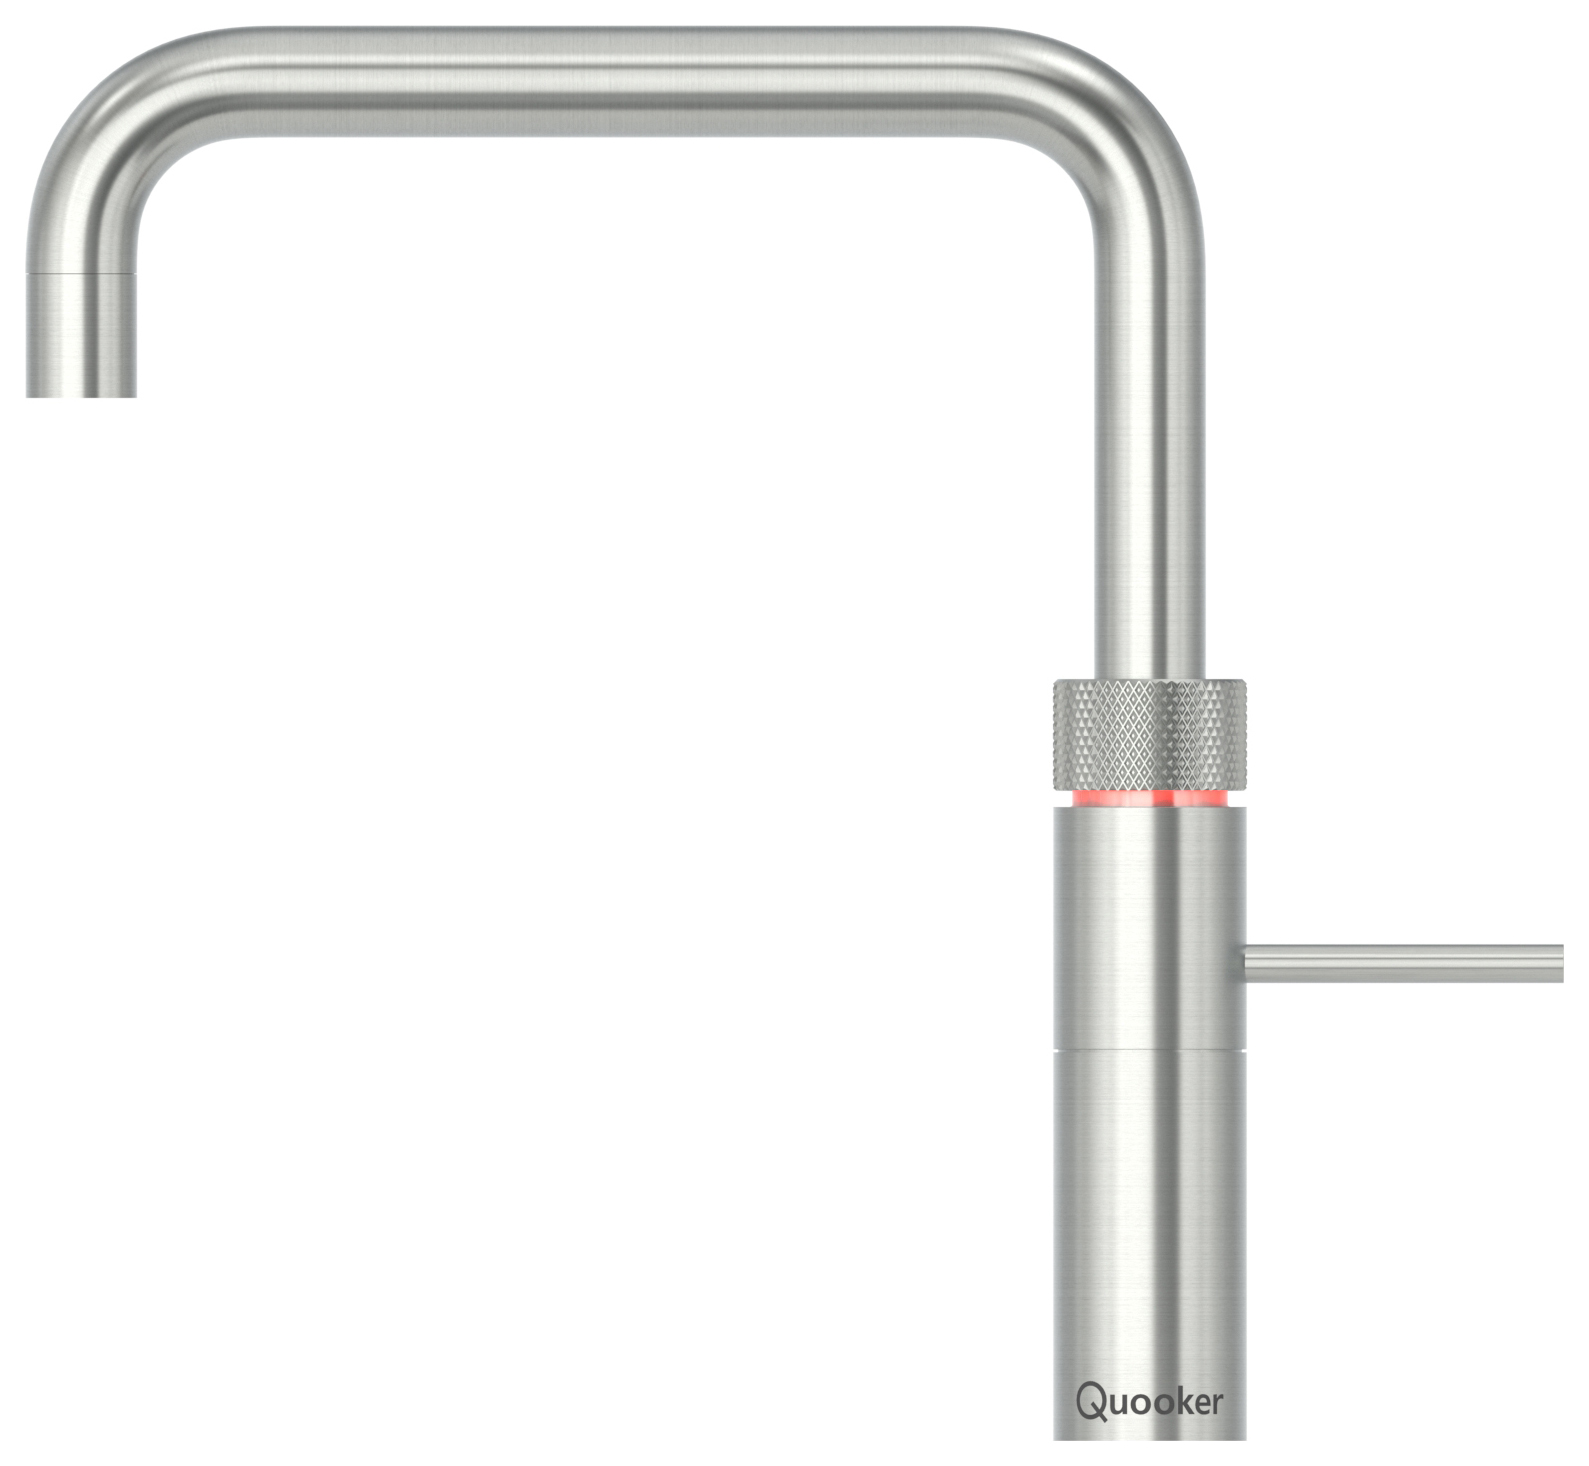 Quooker PRO3 Fusion 3-in-1 Square Neck Boiling Water Kitchen Tap - Stainless Steel